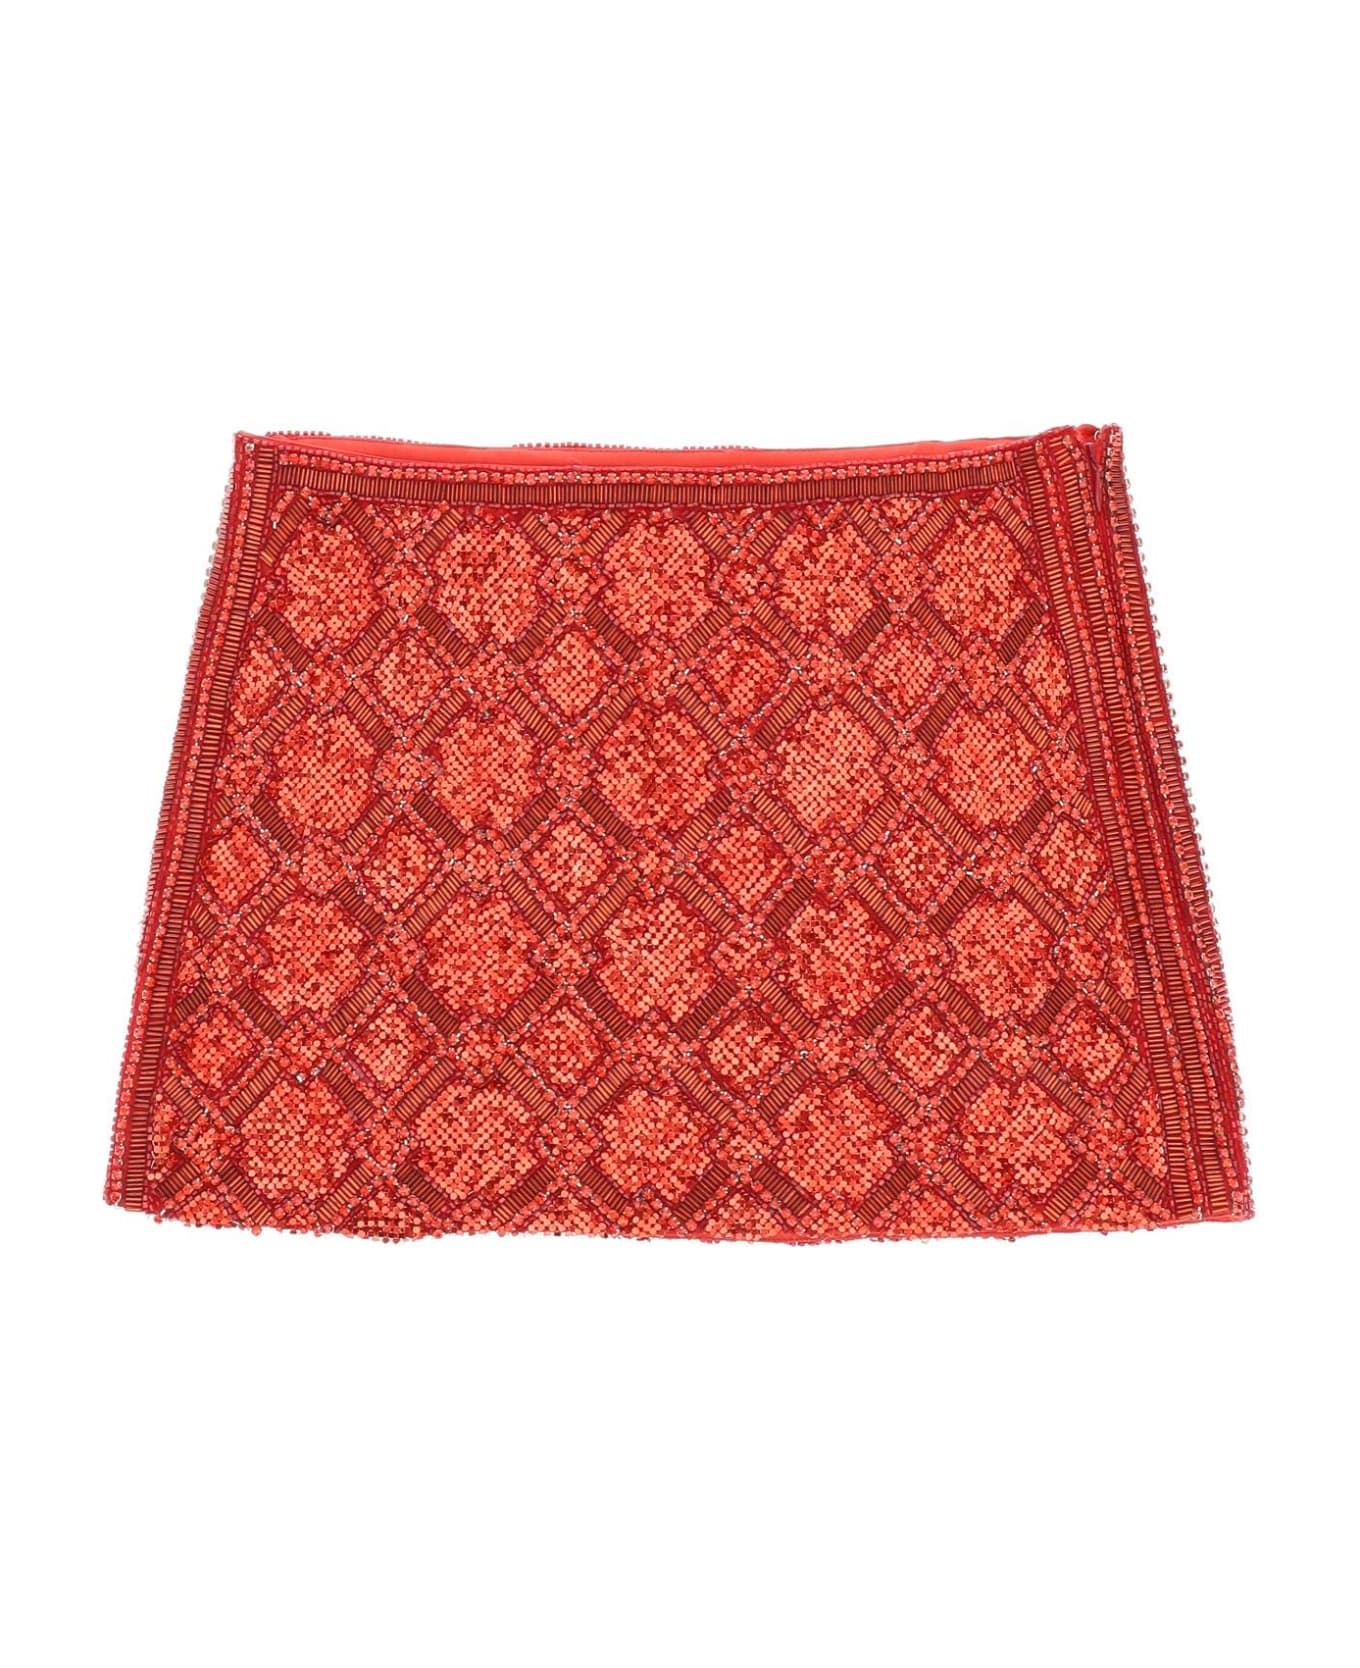 retrofete Embroidered Mini Skirt - RED (Red)